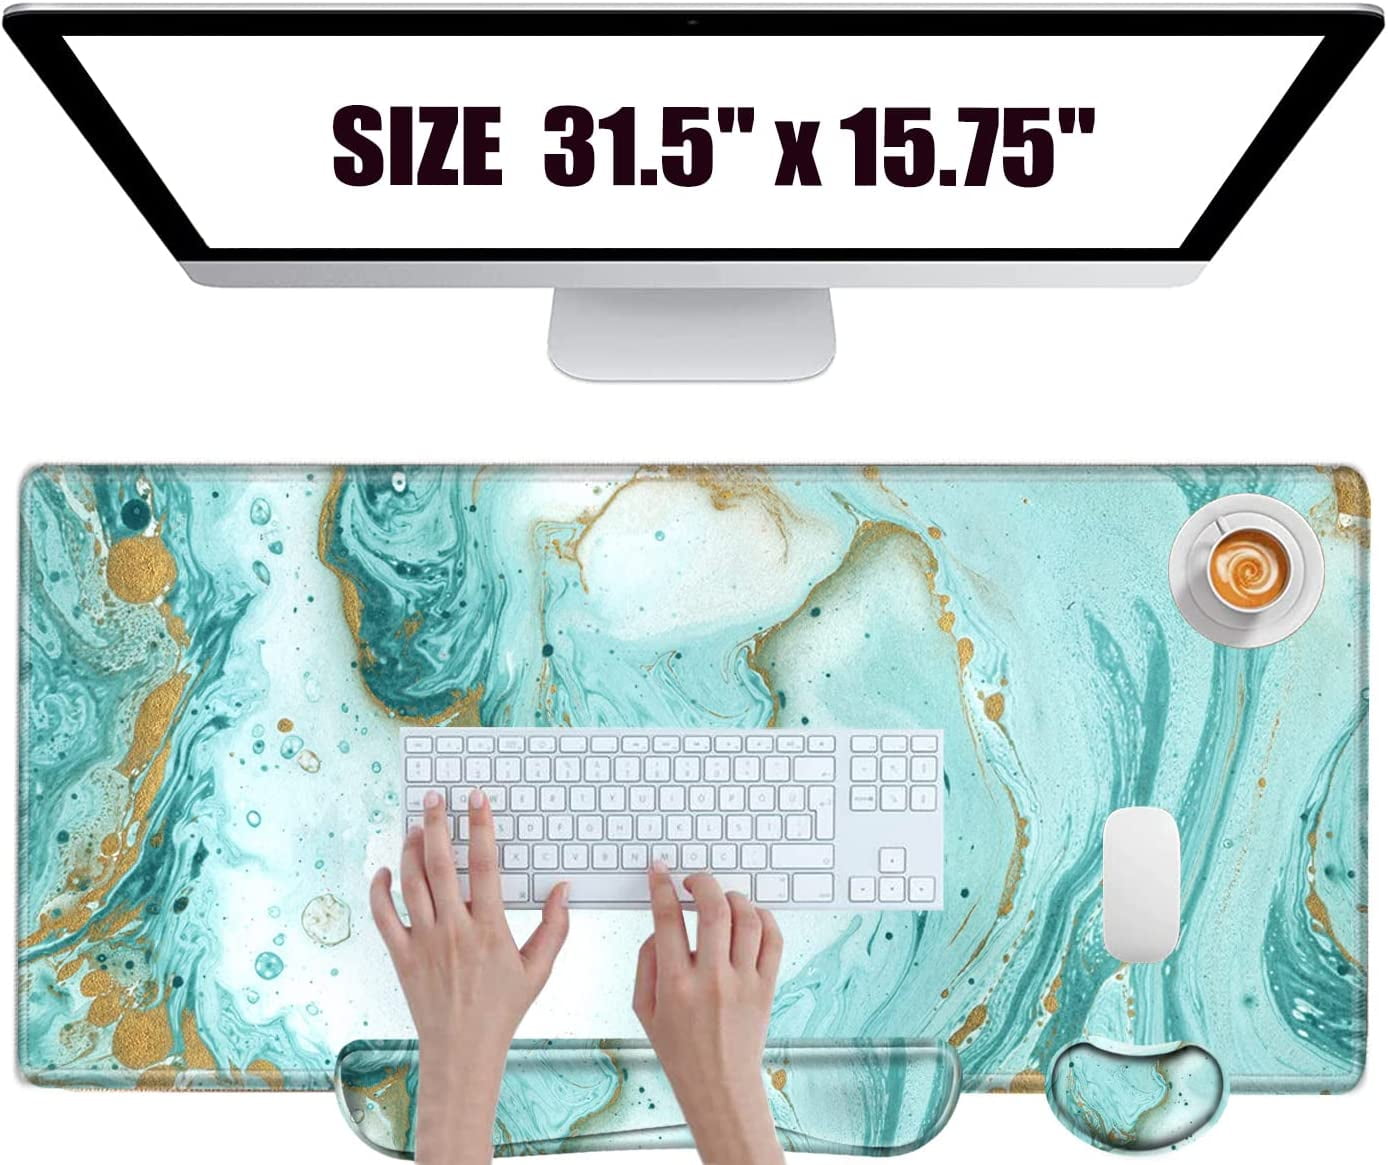 Keyboard Wrist Rest and Desk Mats On Top of Desks- Marble Desk Pad Teal  Wrist Rests for Keyboard and Mouse 31.5 x 15.75 Large Mouse Pad XXL Desk  Organization Decor for Women